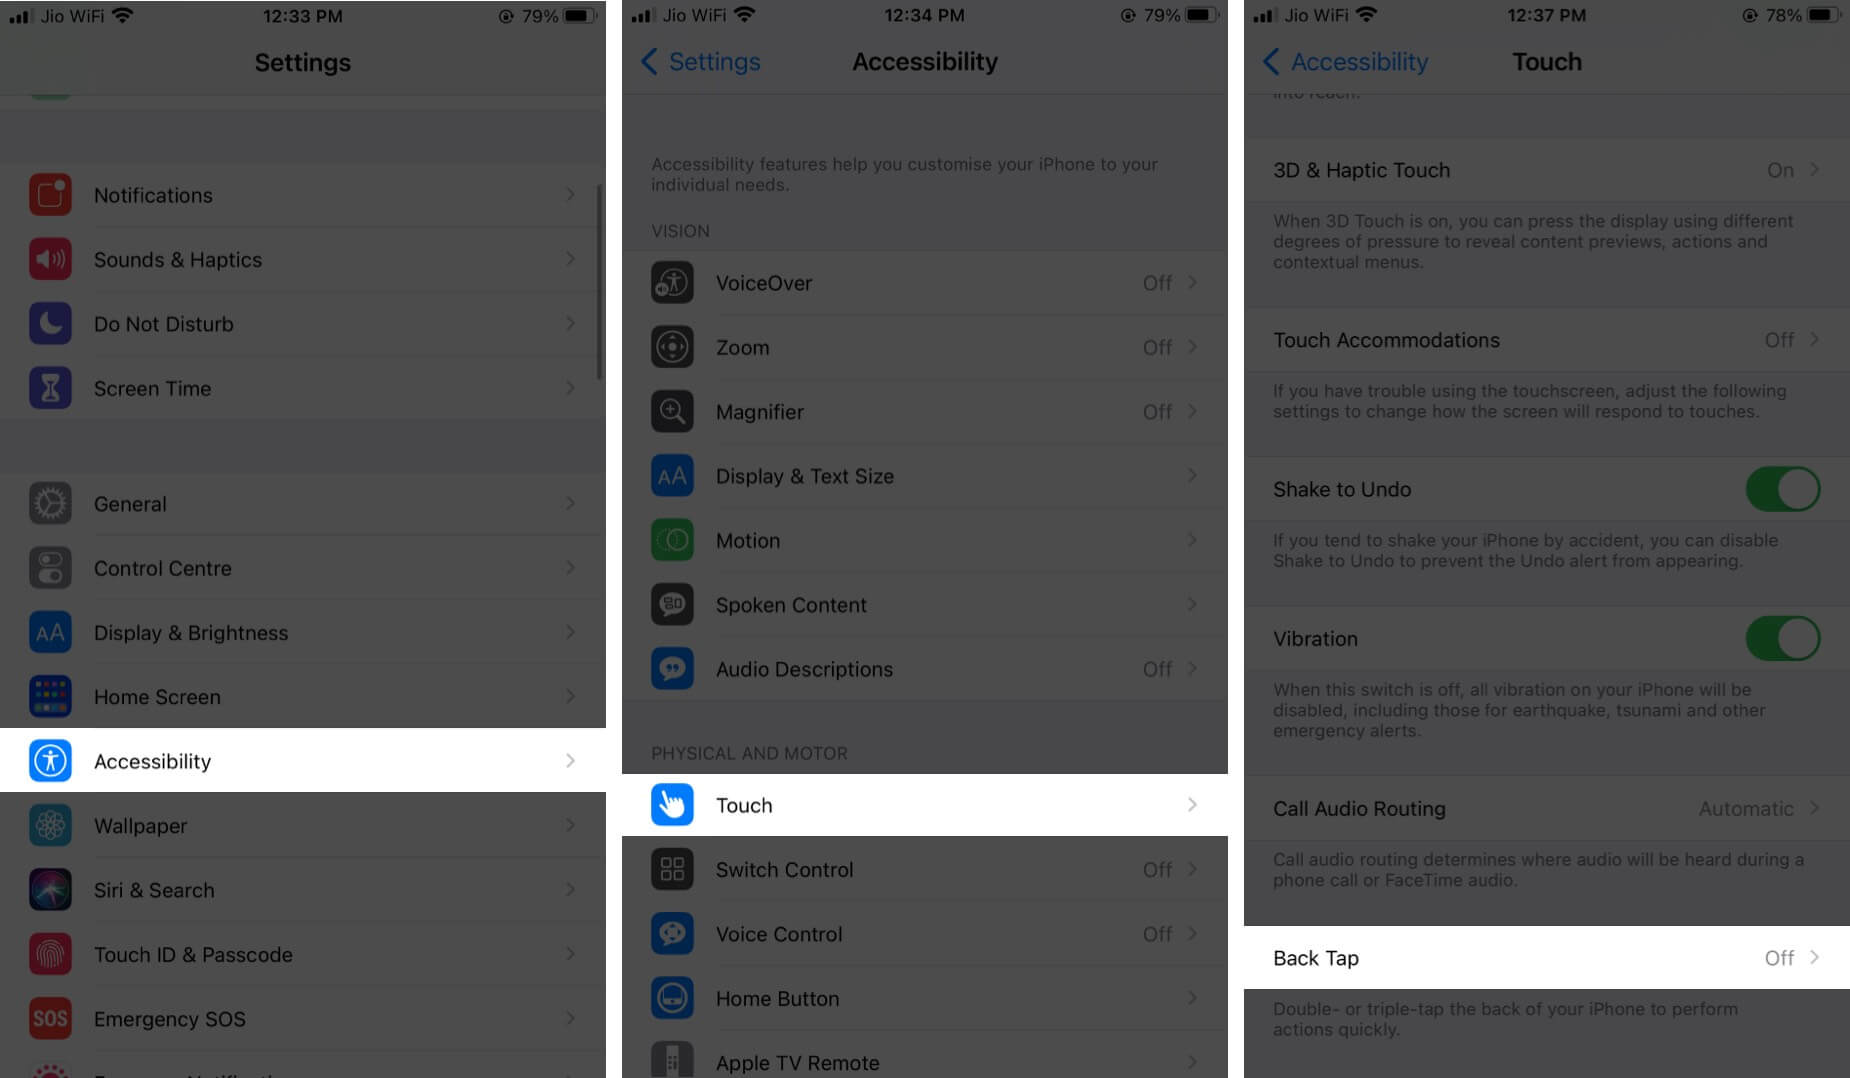 Tap on Accessibility Then Touch and Then Tap on Back Tap in iPhone Settings